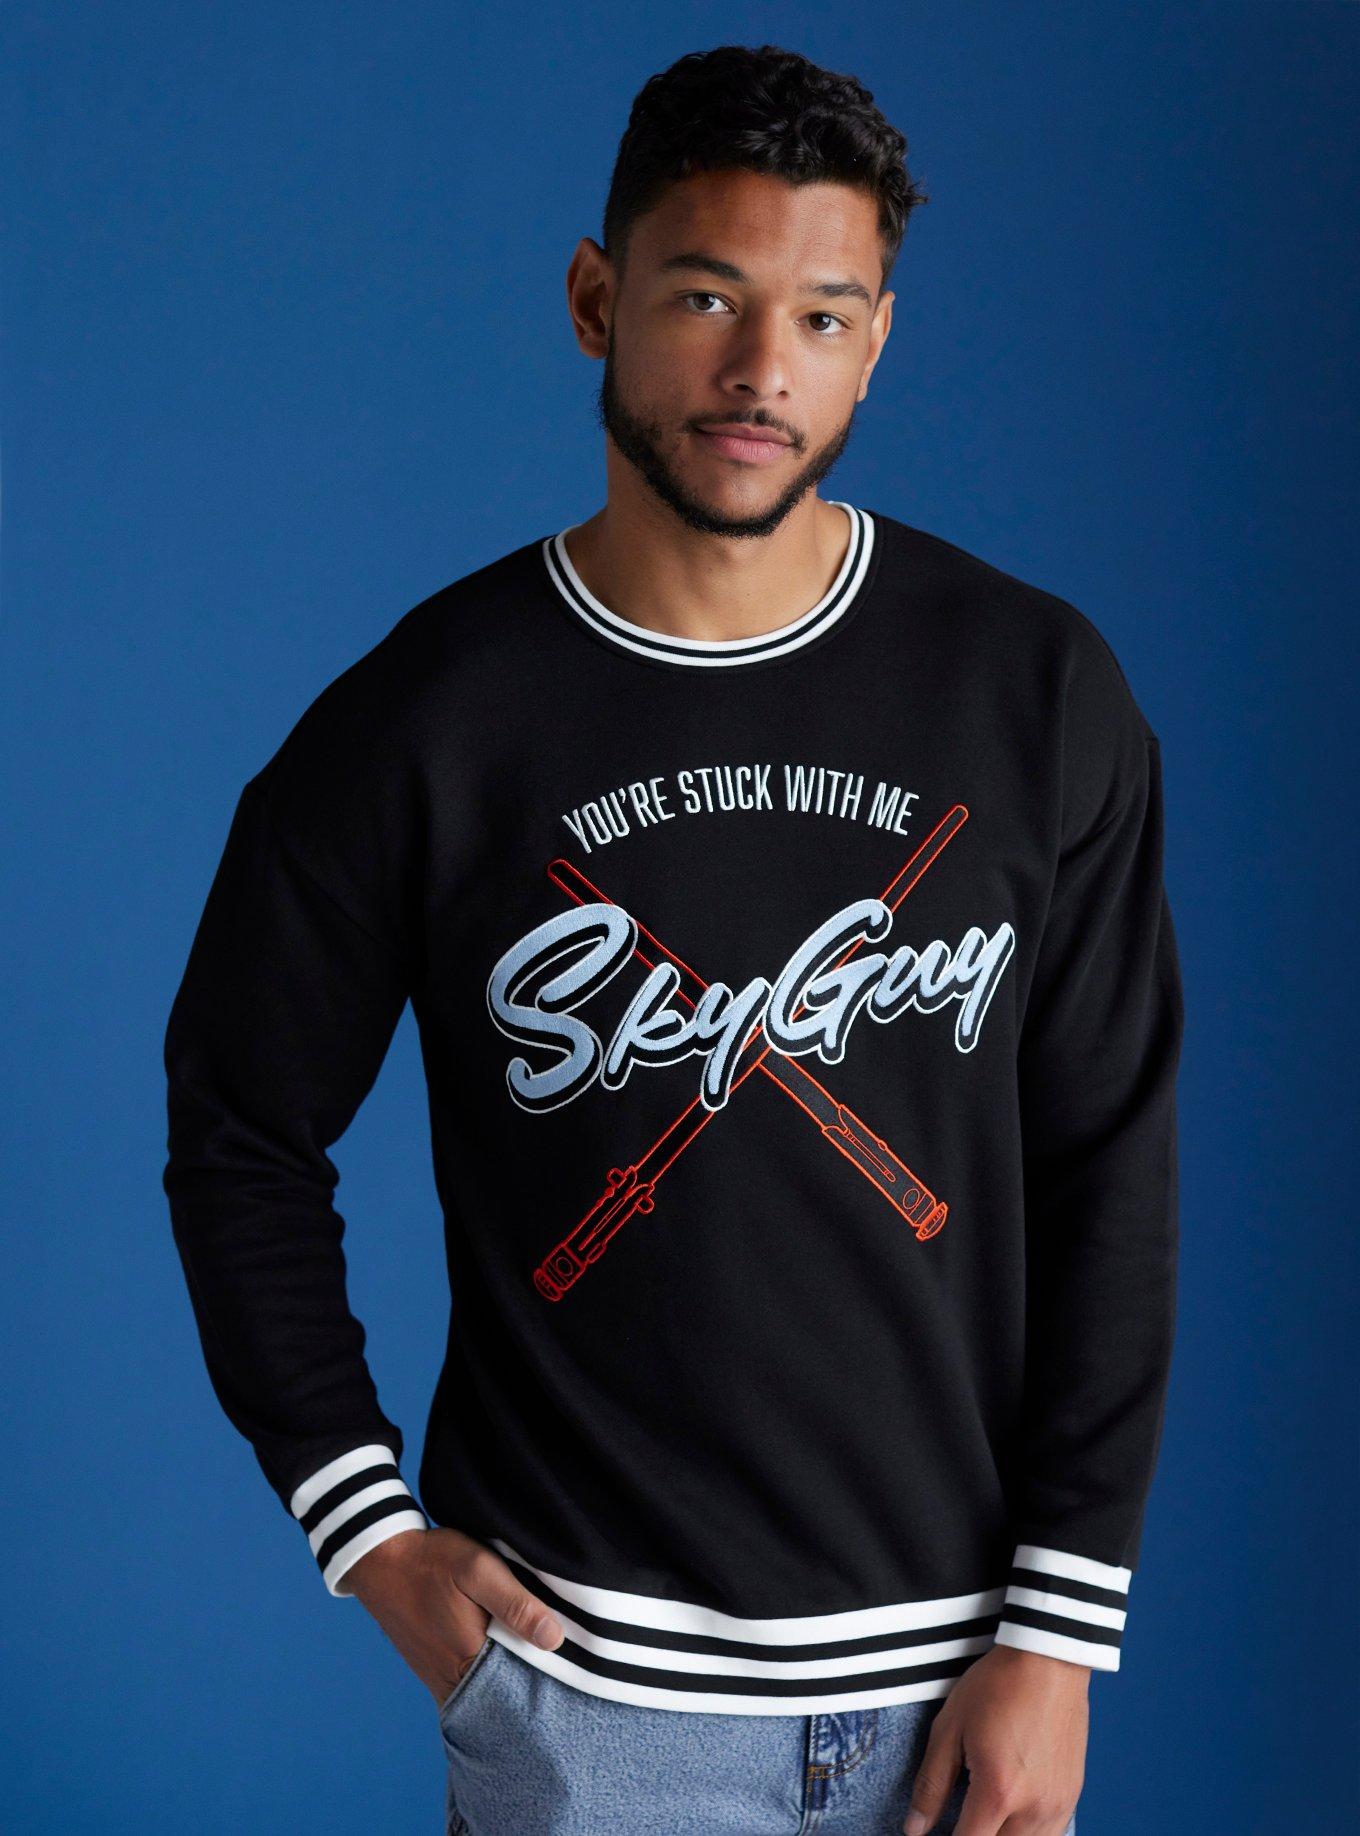 Our Universe Star Wars Stuck With Me SkyGuy Sweatshirt Our Universe Exclusive, MULTI, hi-res